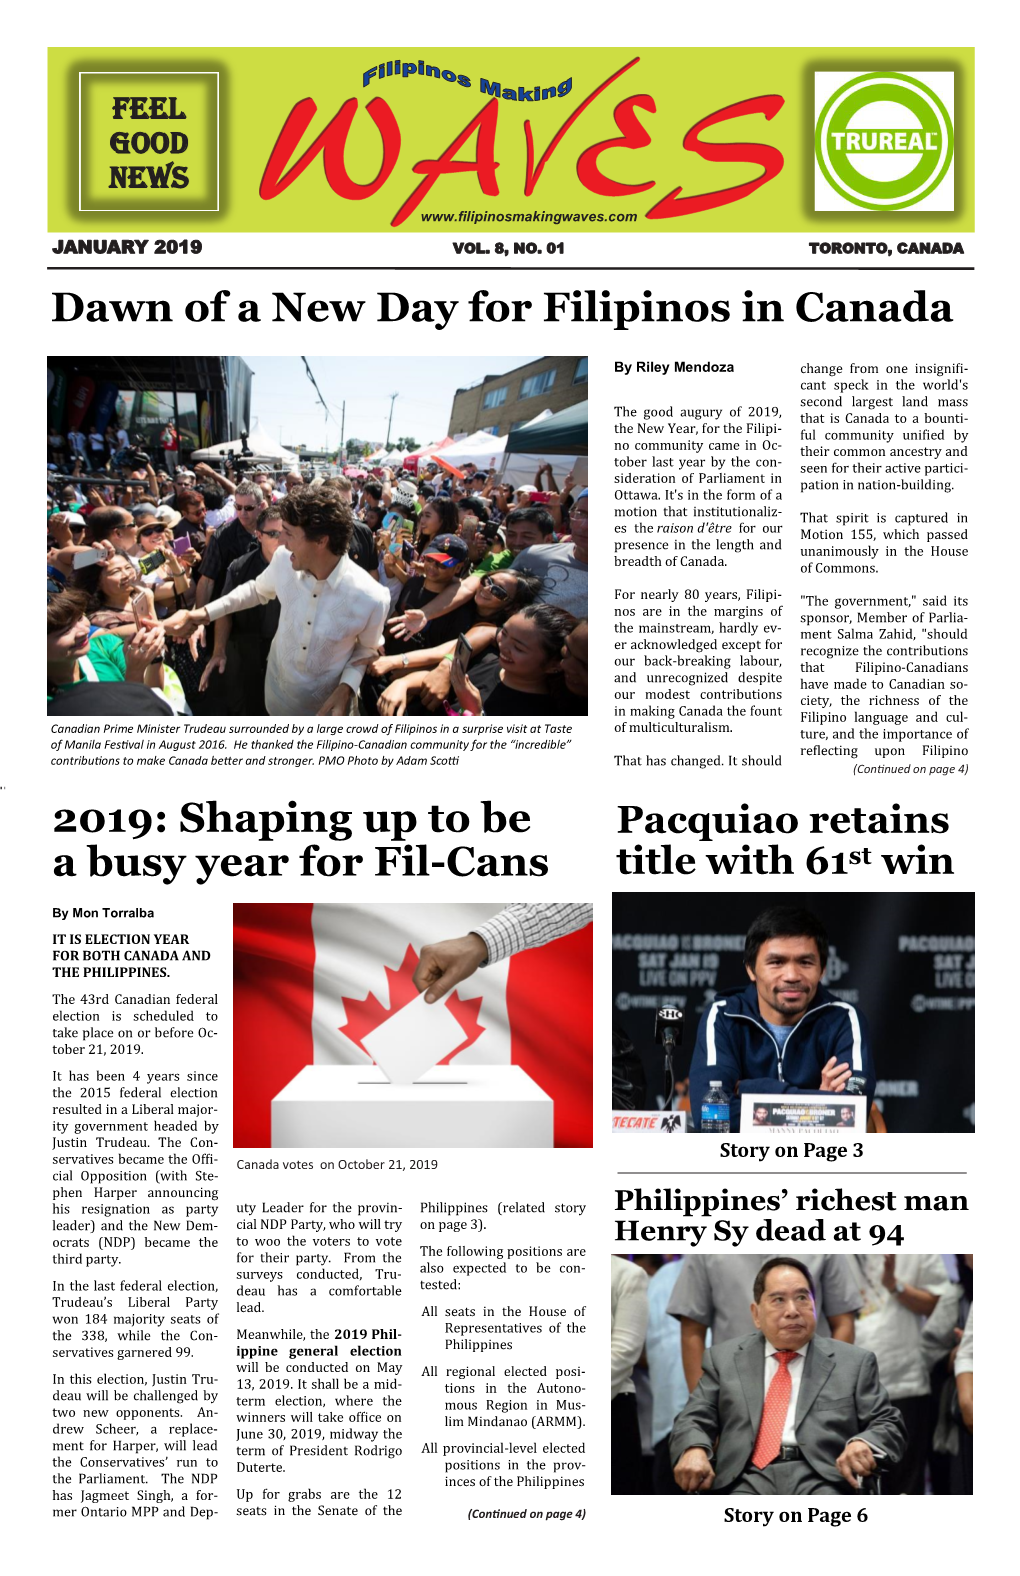 Dawn of a New Day for Filipinos in Canada 2019